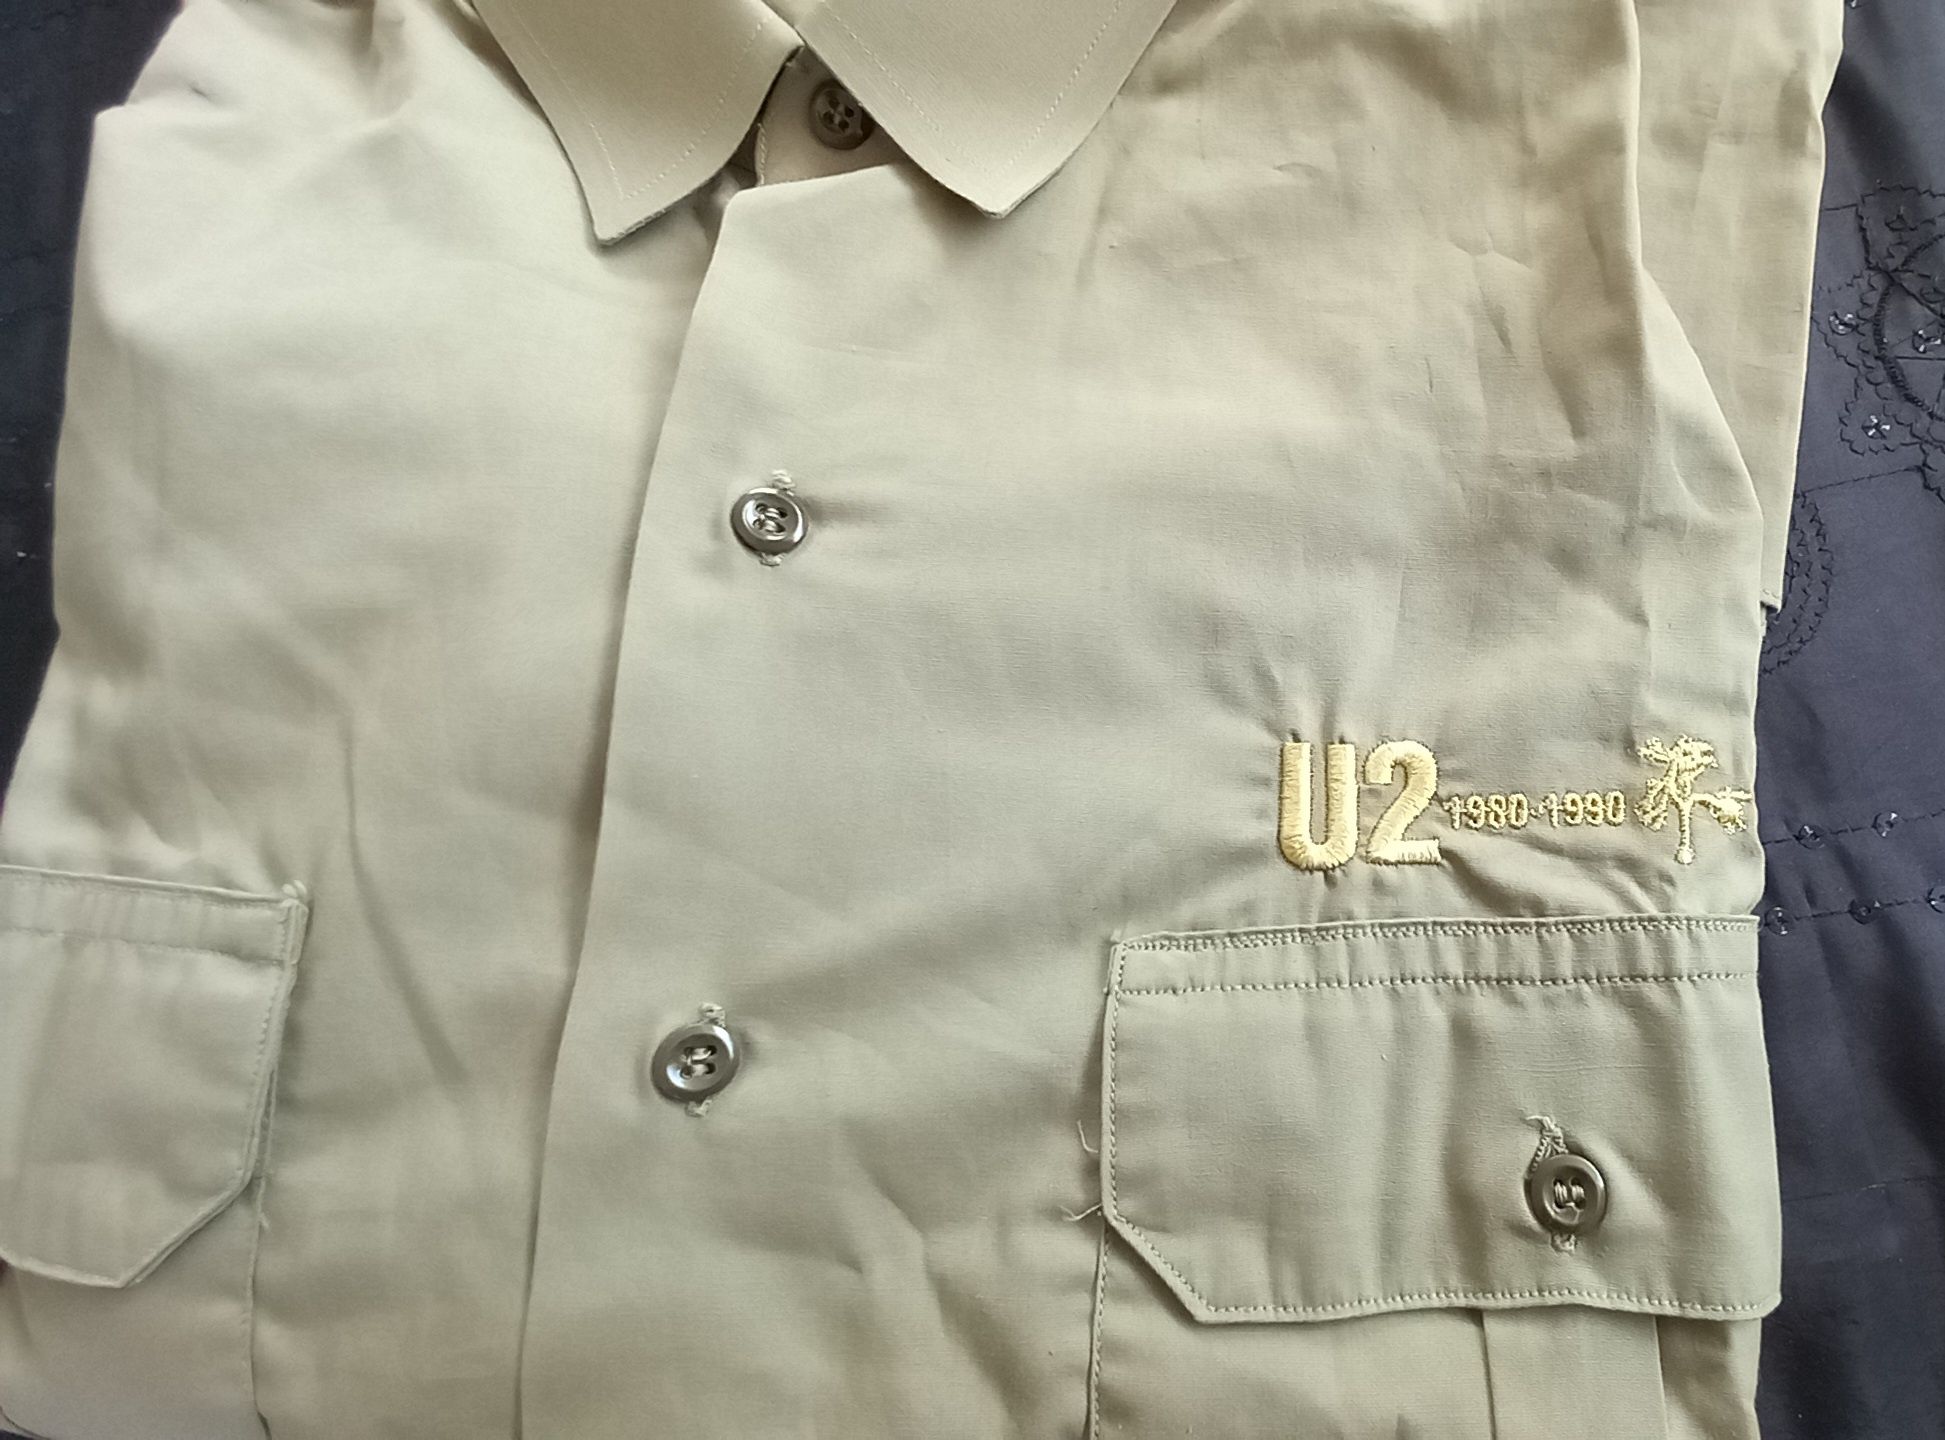 U2 The Best Of 80/90 camisa Official UK Island